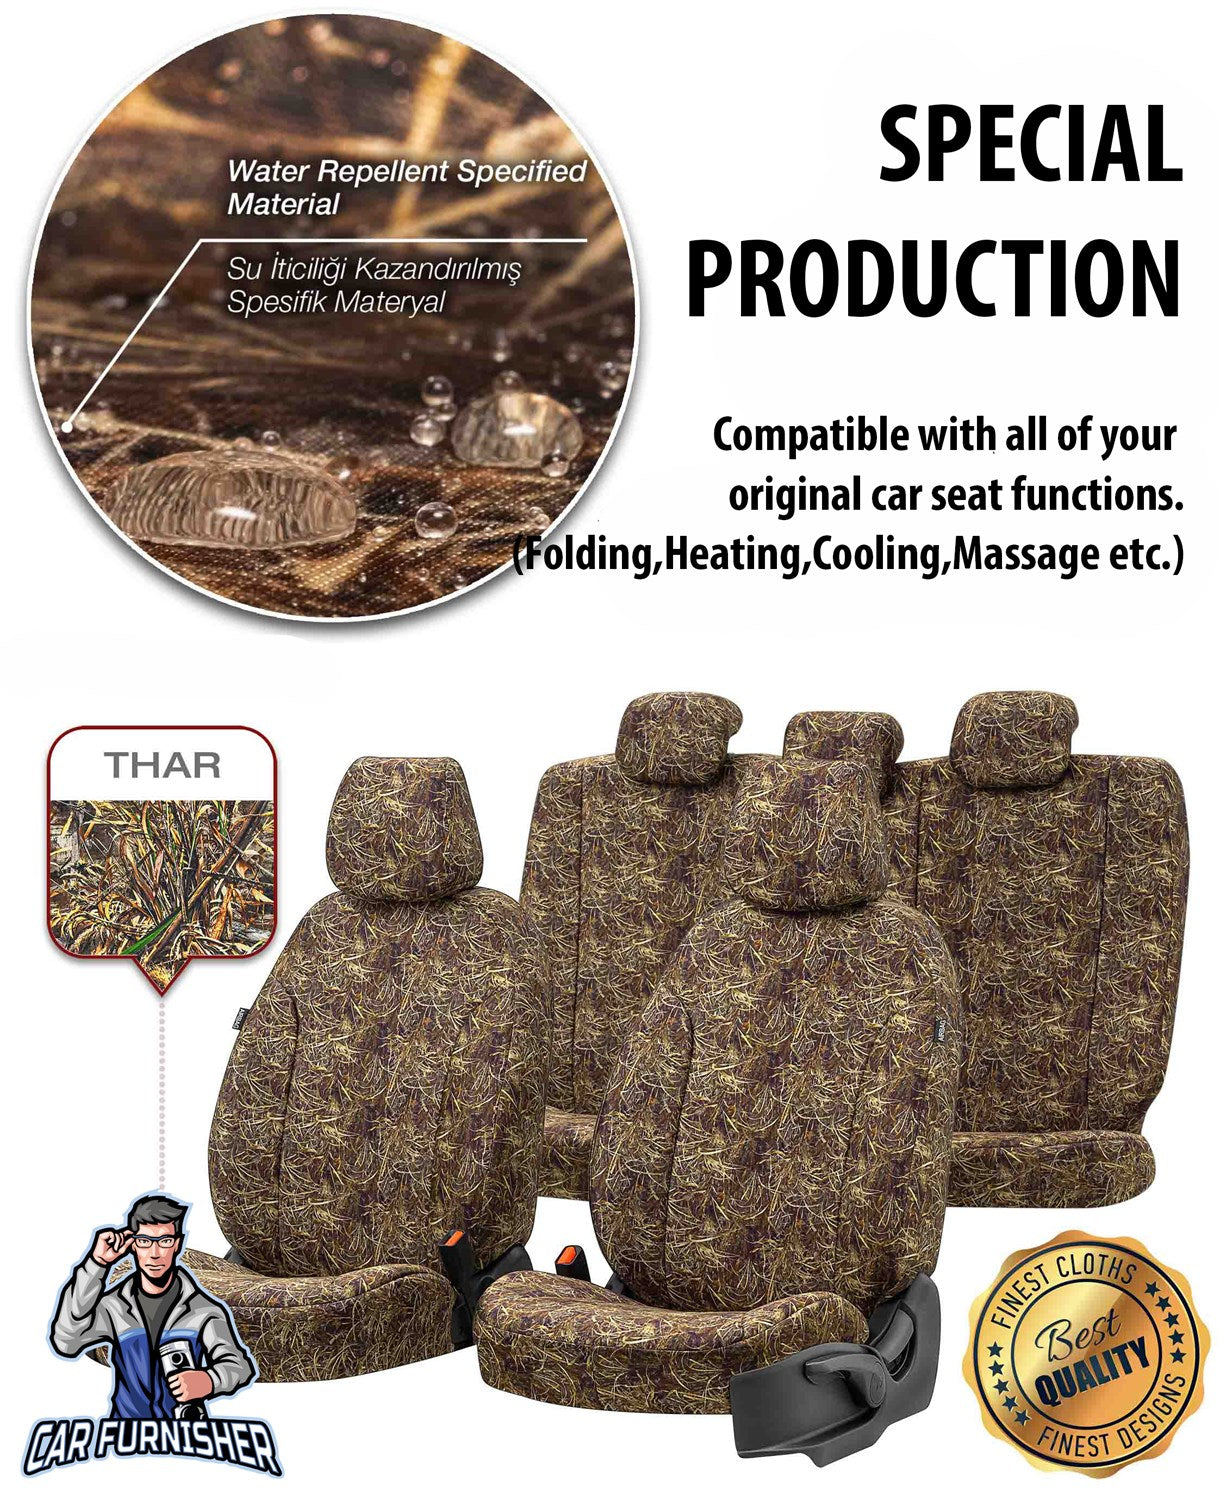 Chevrolet Spark Seat Covers Camouflage Waterproof Design Montblanc Camo Waterproof Fabric